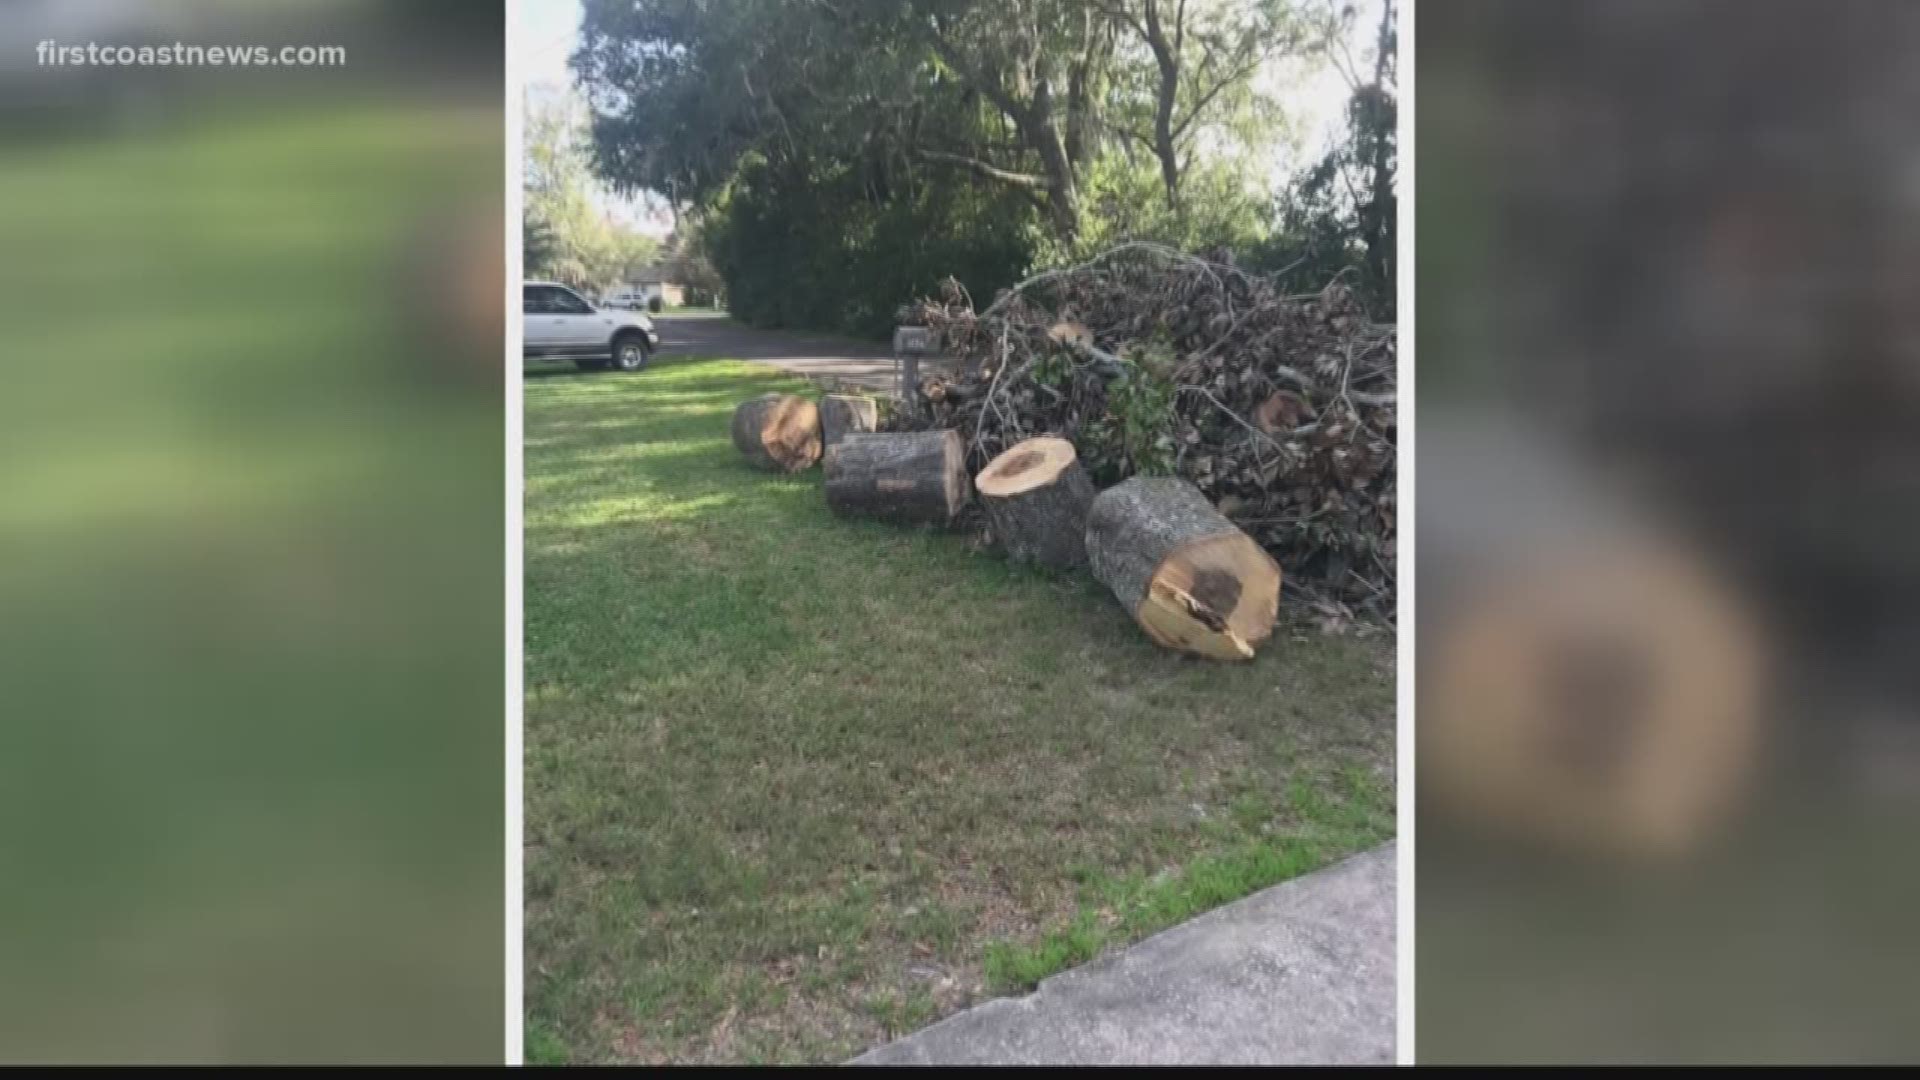 Joyce Hodges said an employee with the company she paid upfront showed up to cut the branches, but never returned to remove them.